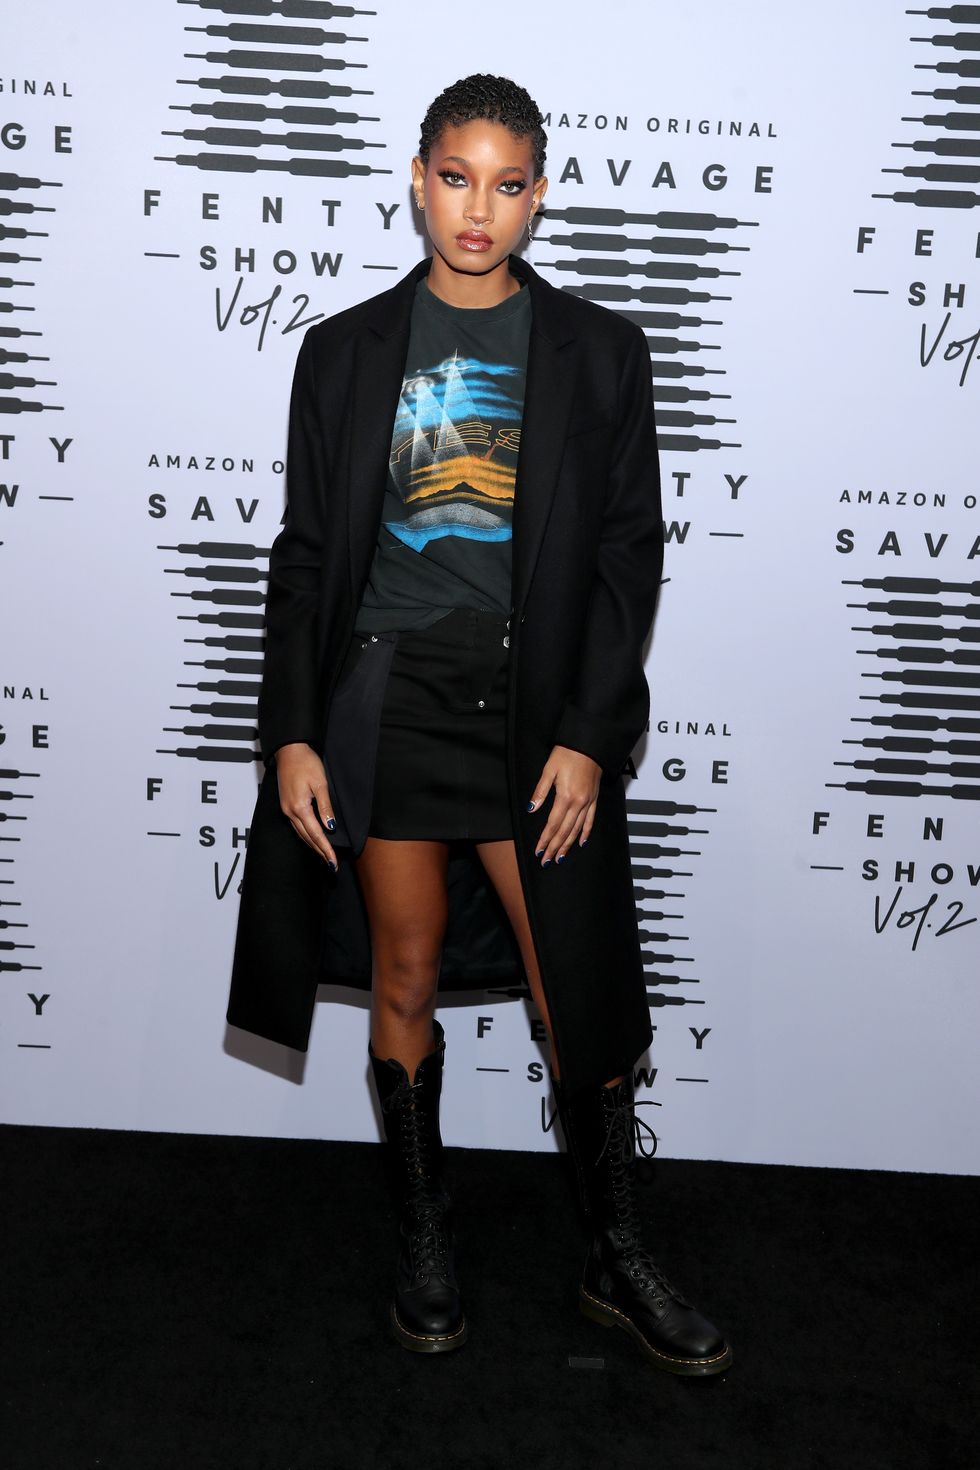 rihanna's savage x fenty show vol 2 presented by amazon prime vide – step and repeat